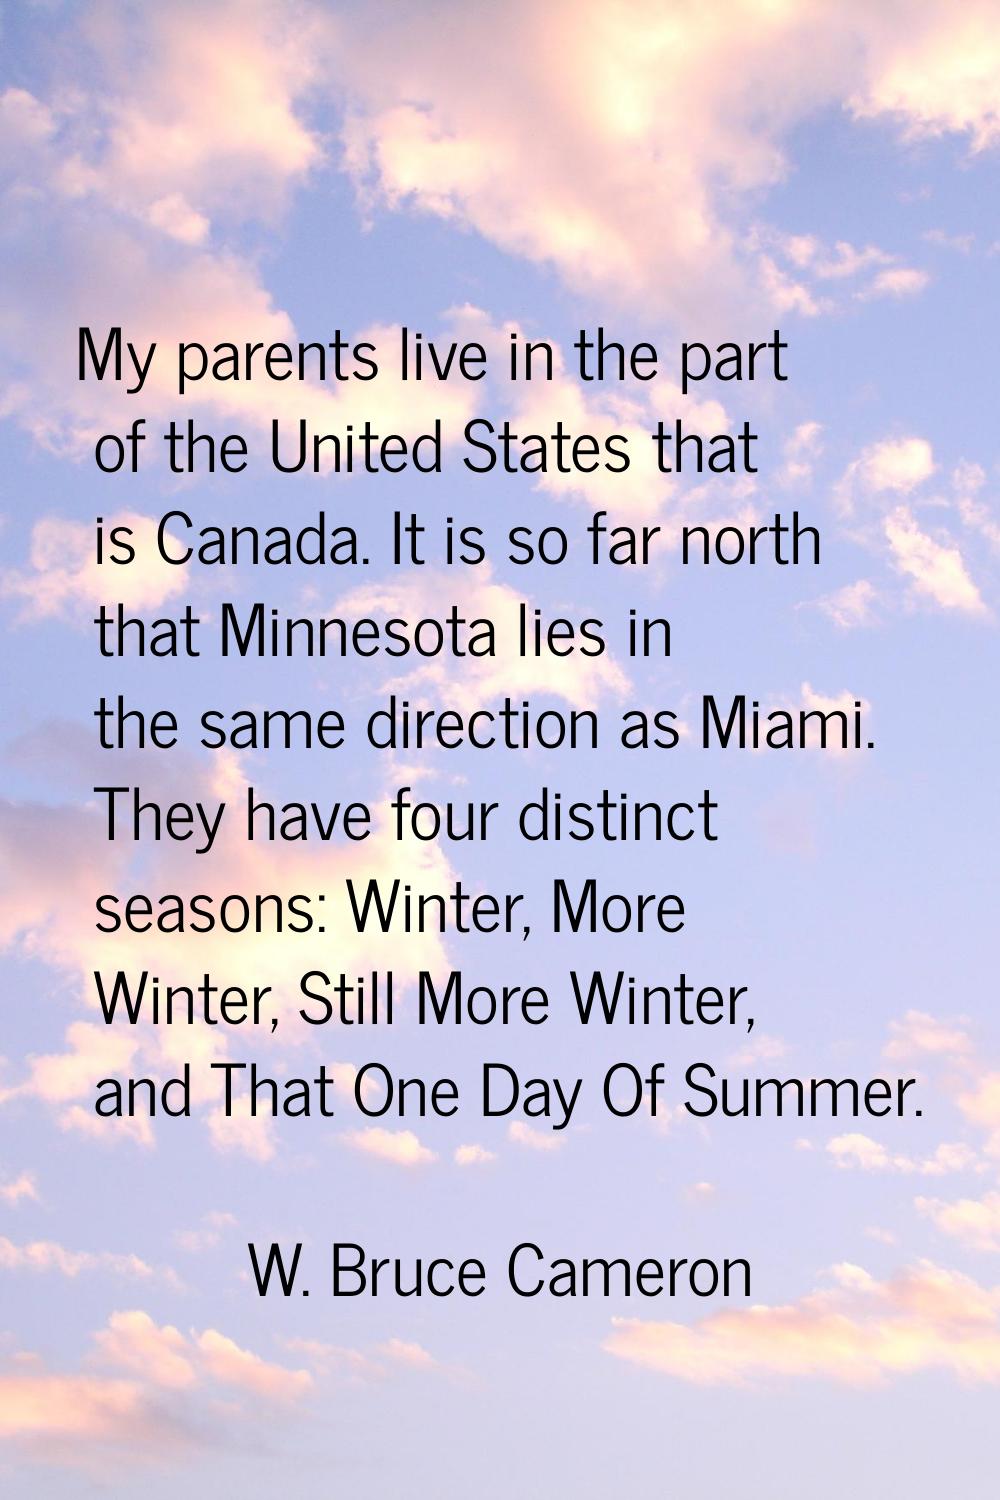 My parents live in the part of the United States that is Canada. It is so far north that Minnesota 